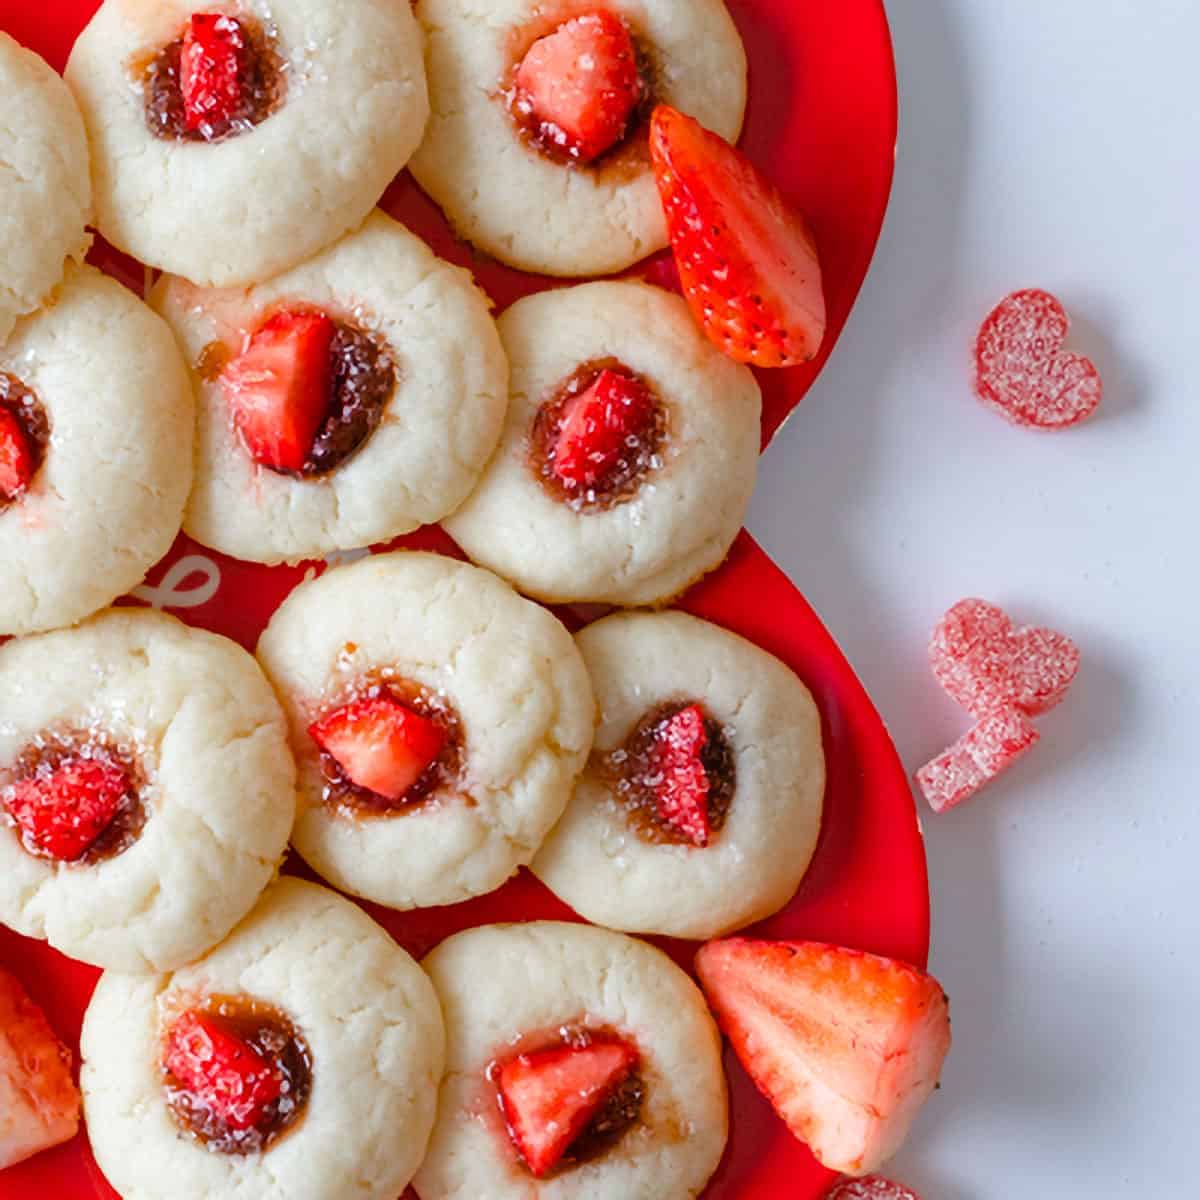 Thumbprint cookies with strawberry jam and a piece of fresh strawberry.